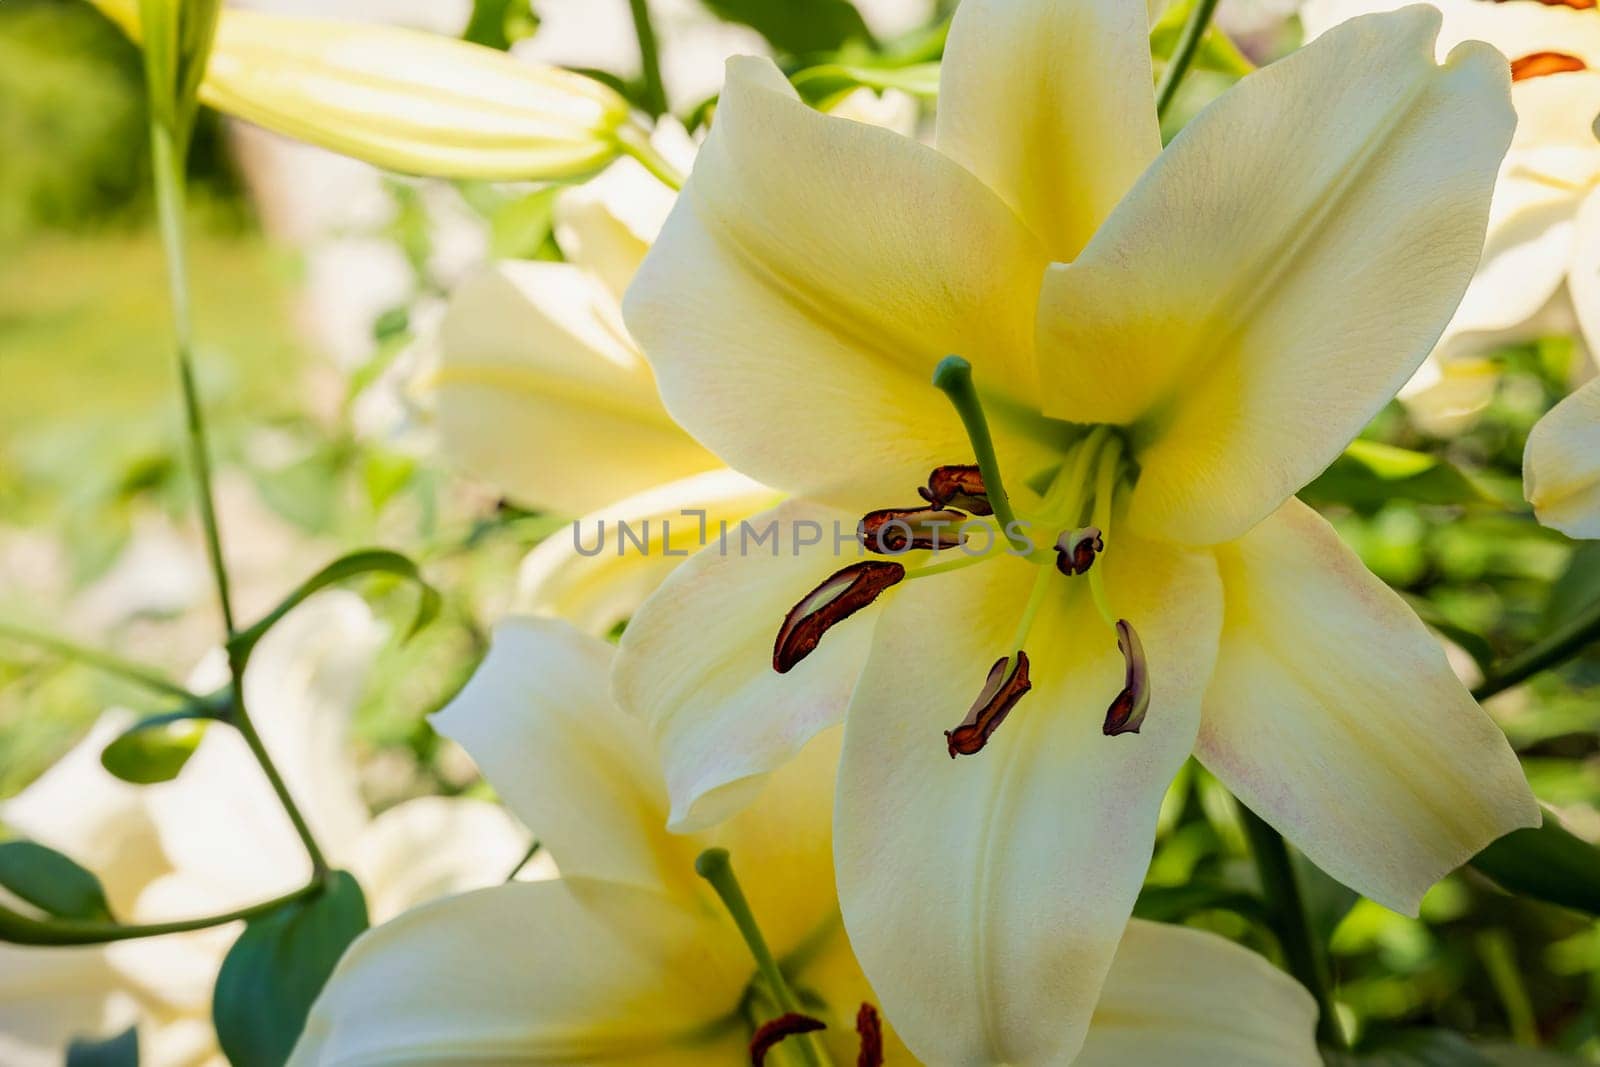 bright yellow lily closeup by zokov